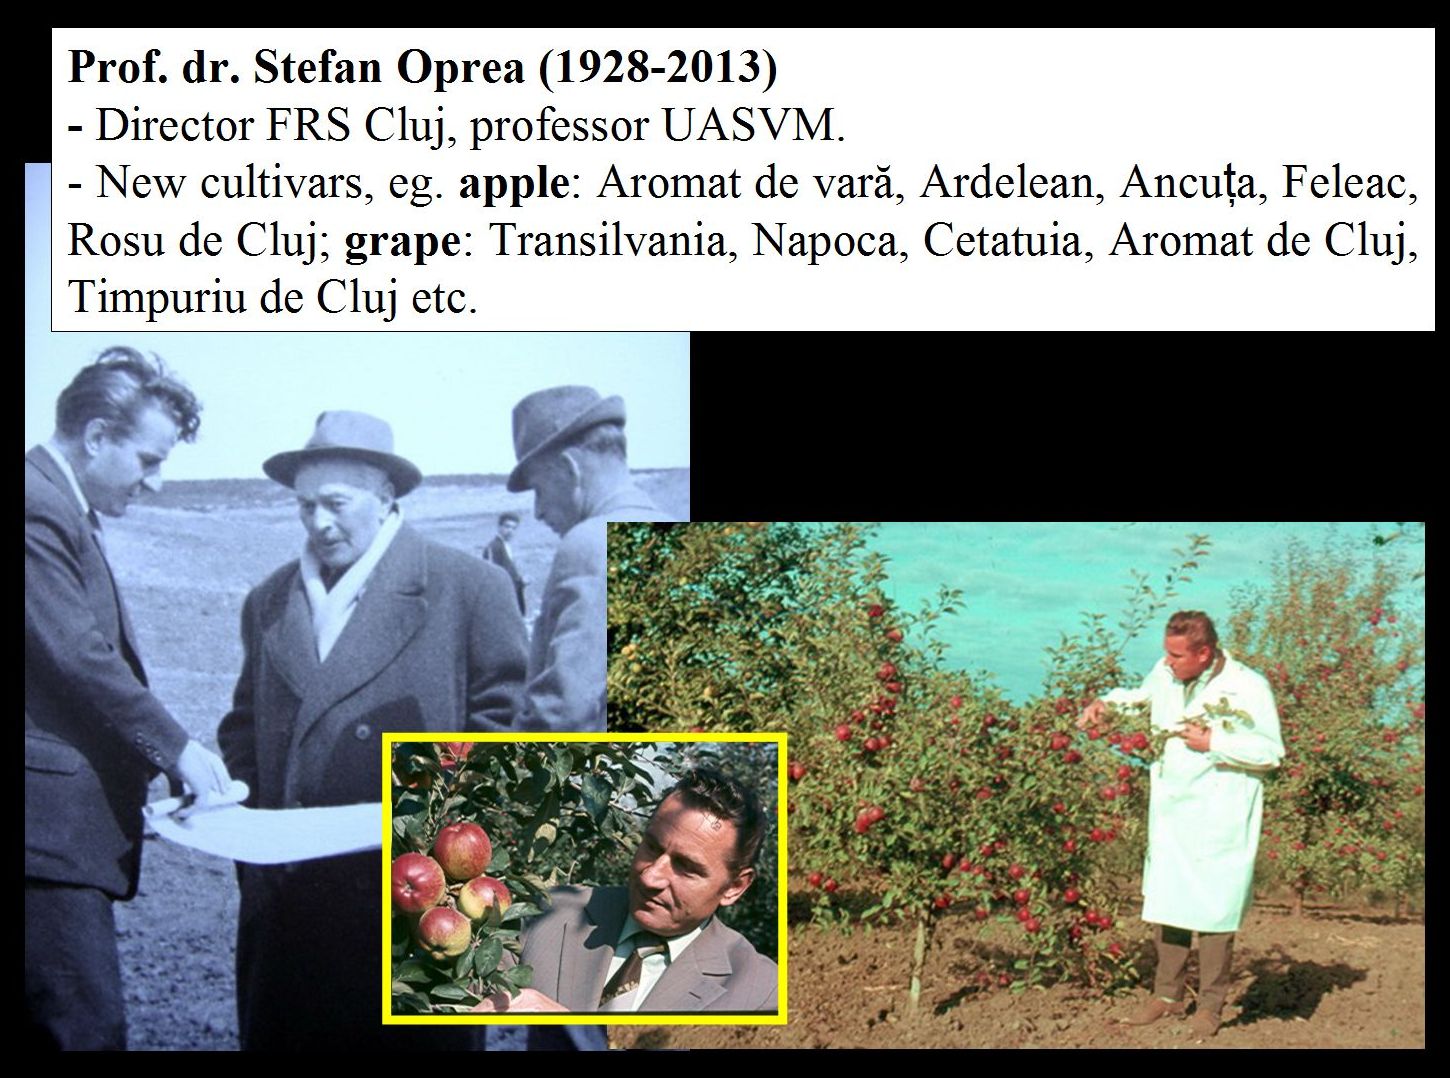 Apple and pear breeding in Cluj-Napoca, history - Prof. dr. Stefan Oprea